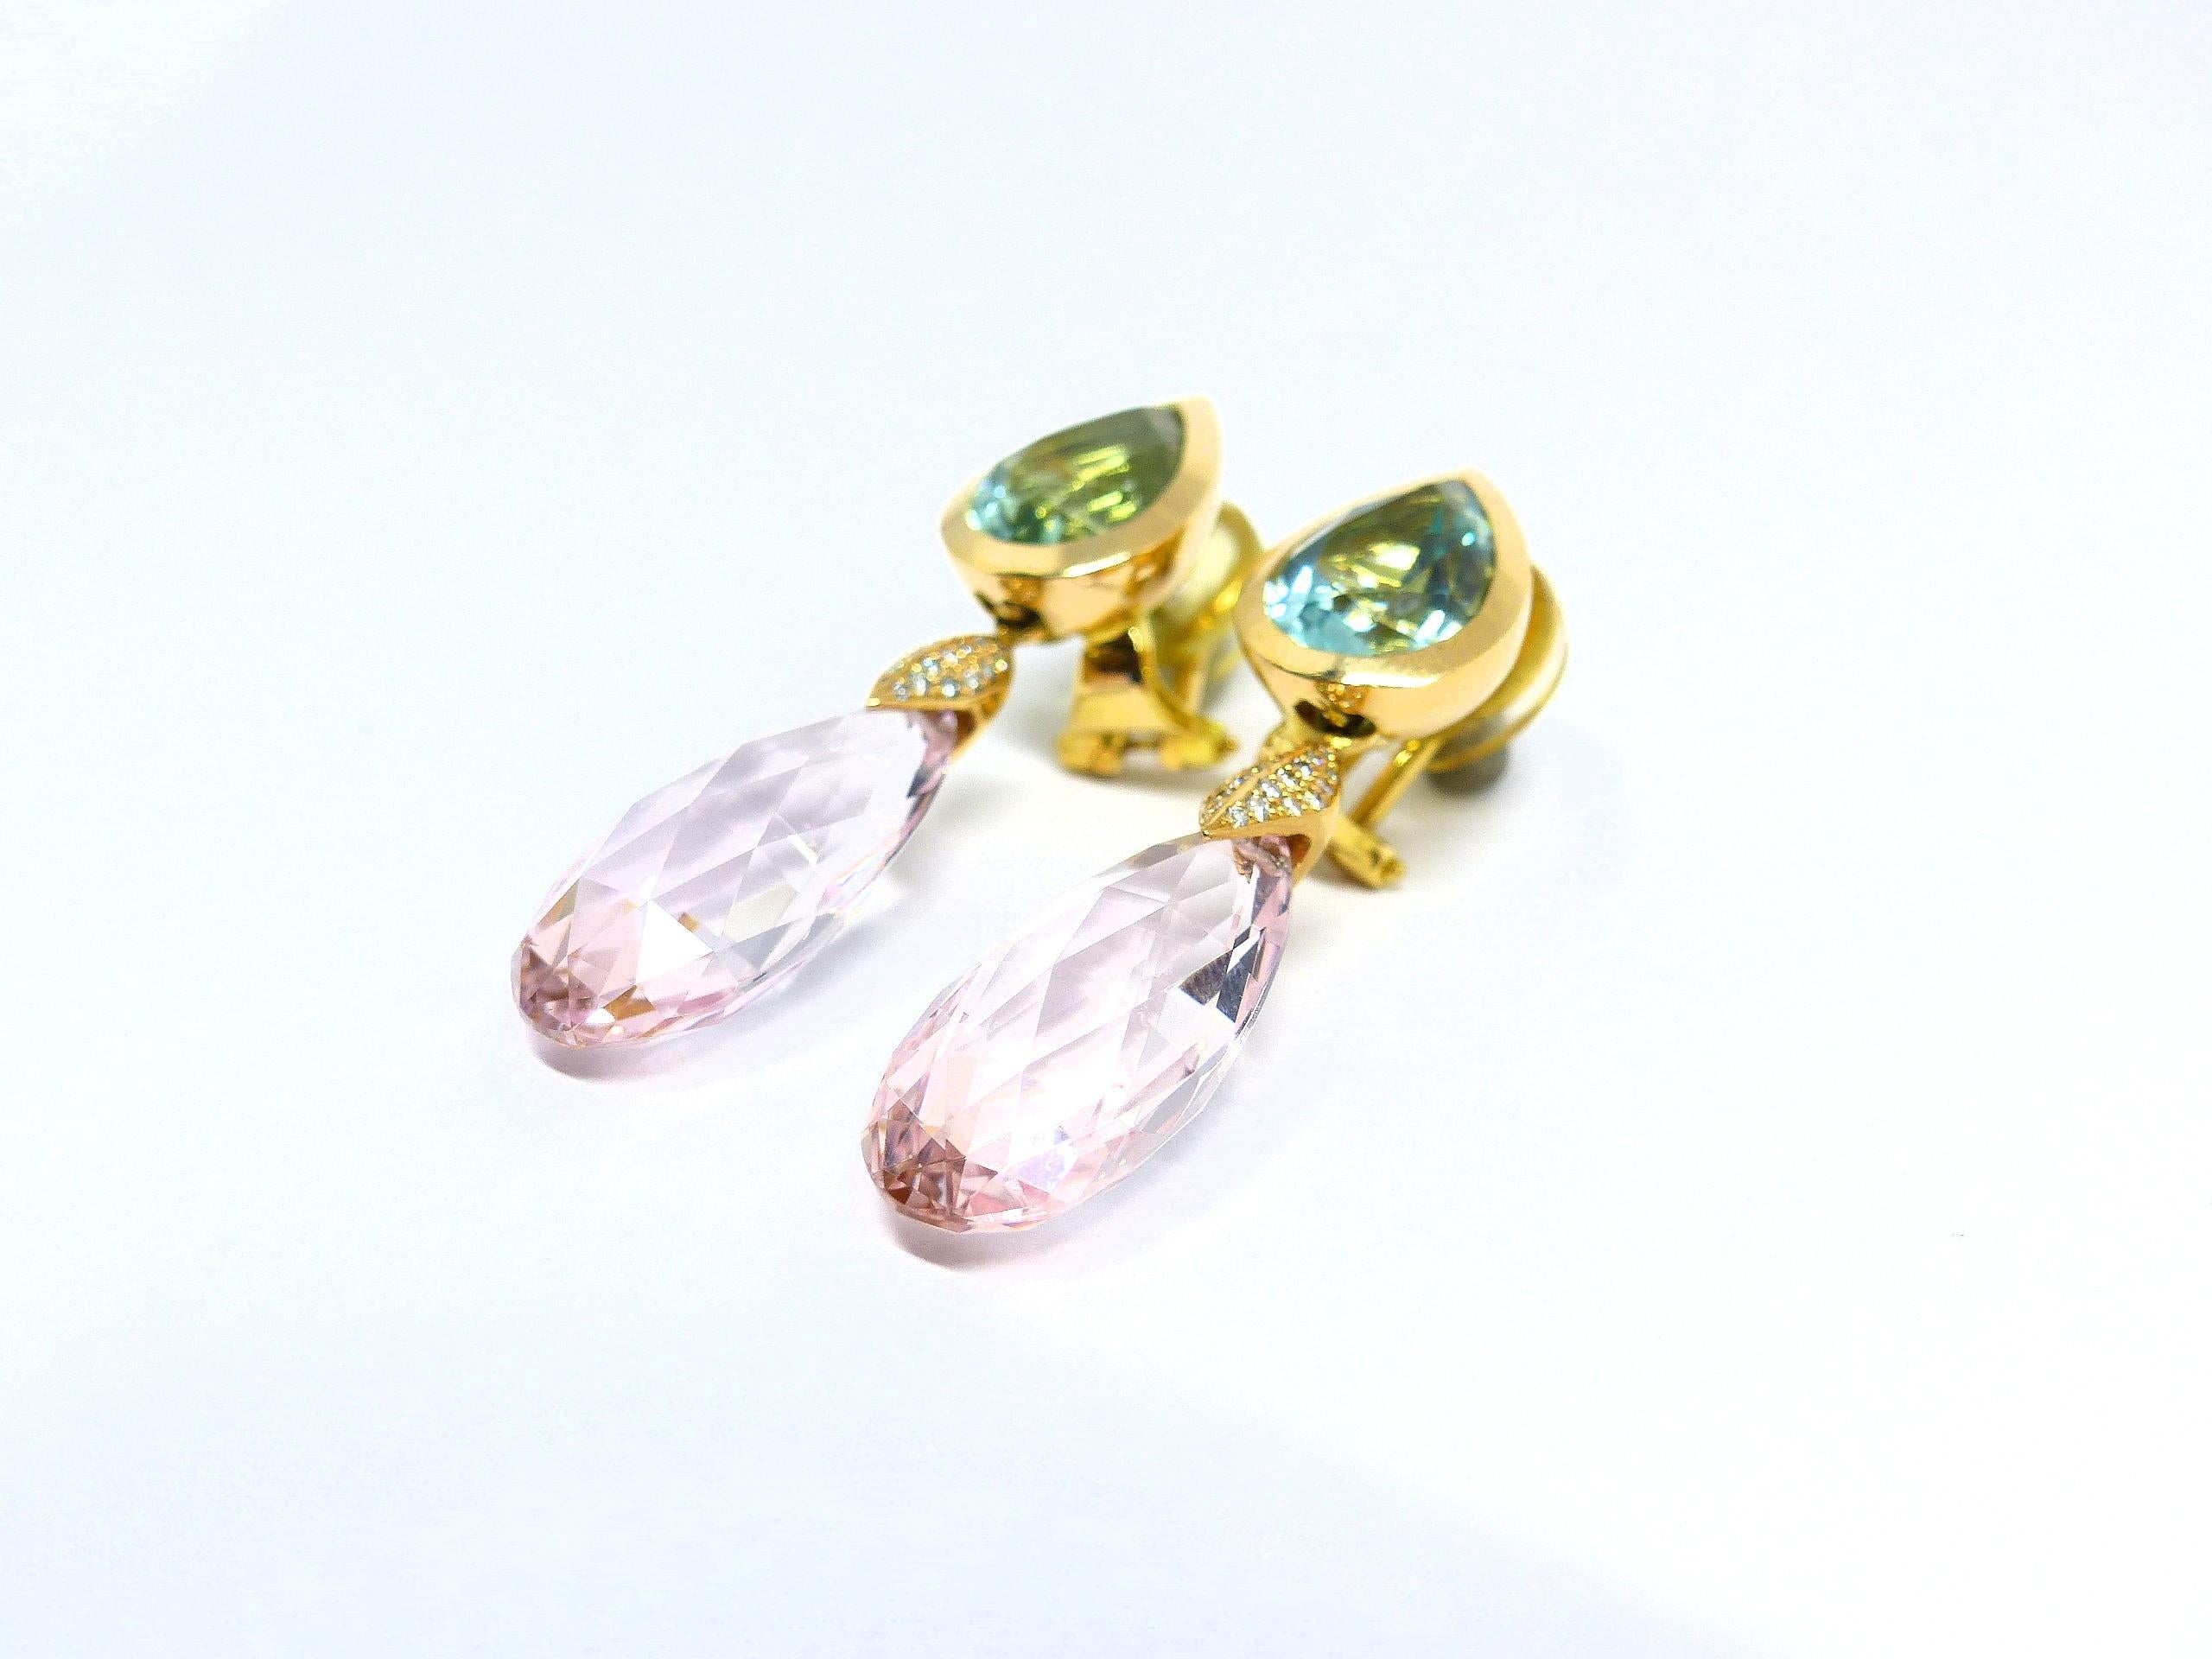 Thomas Leyser is renowned for his contemporary jewellery designs utilizing fine gemstones.

These 18k Rose Gold (10.26g) pair of earrings are set with 2x fine Heliodor (facetted, pear-shape, 12x9mm, 6.15ct) and 2x fine Morganites (briolette cut,